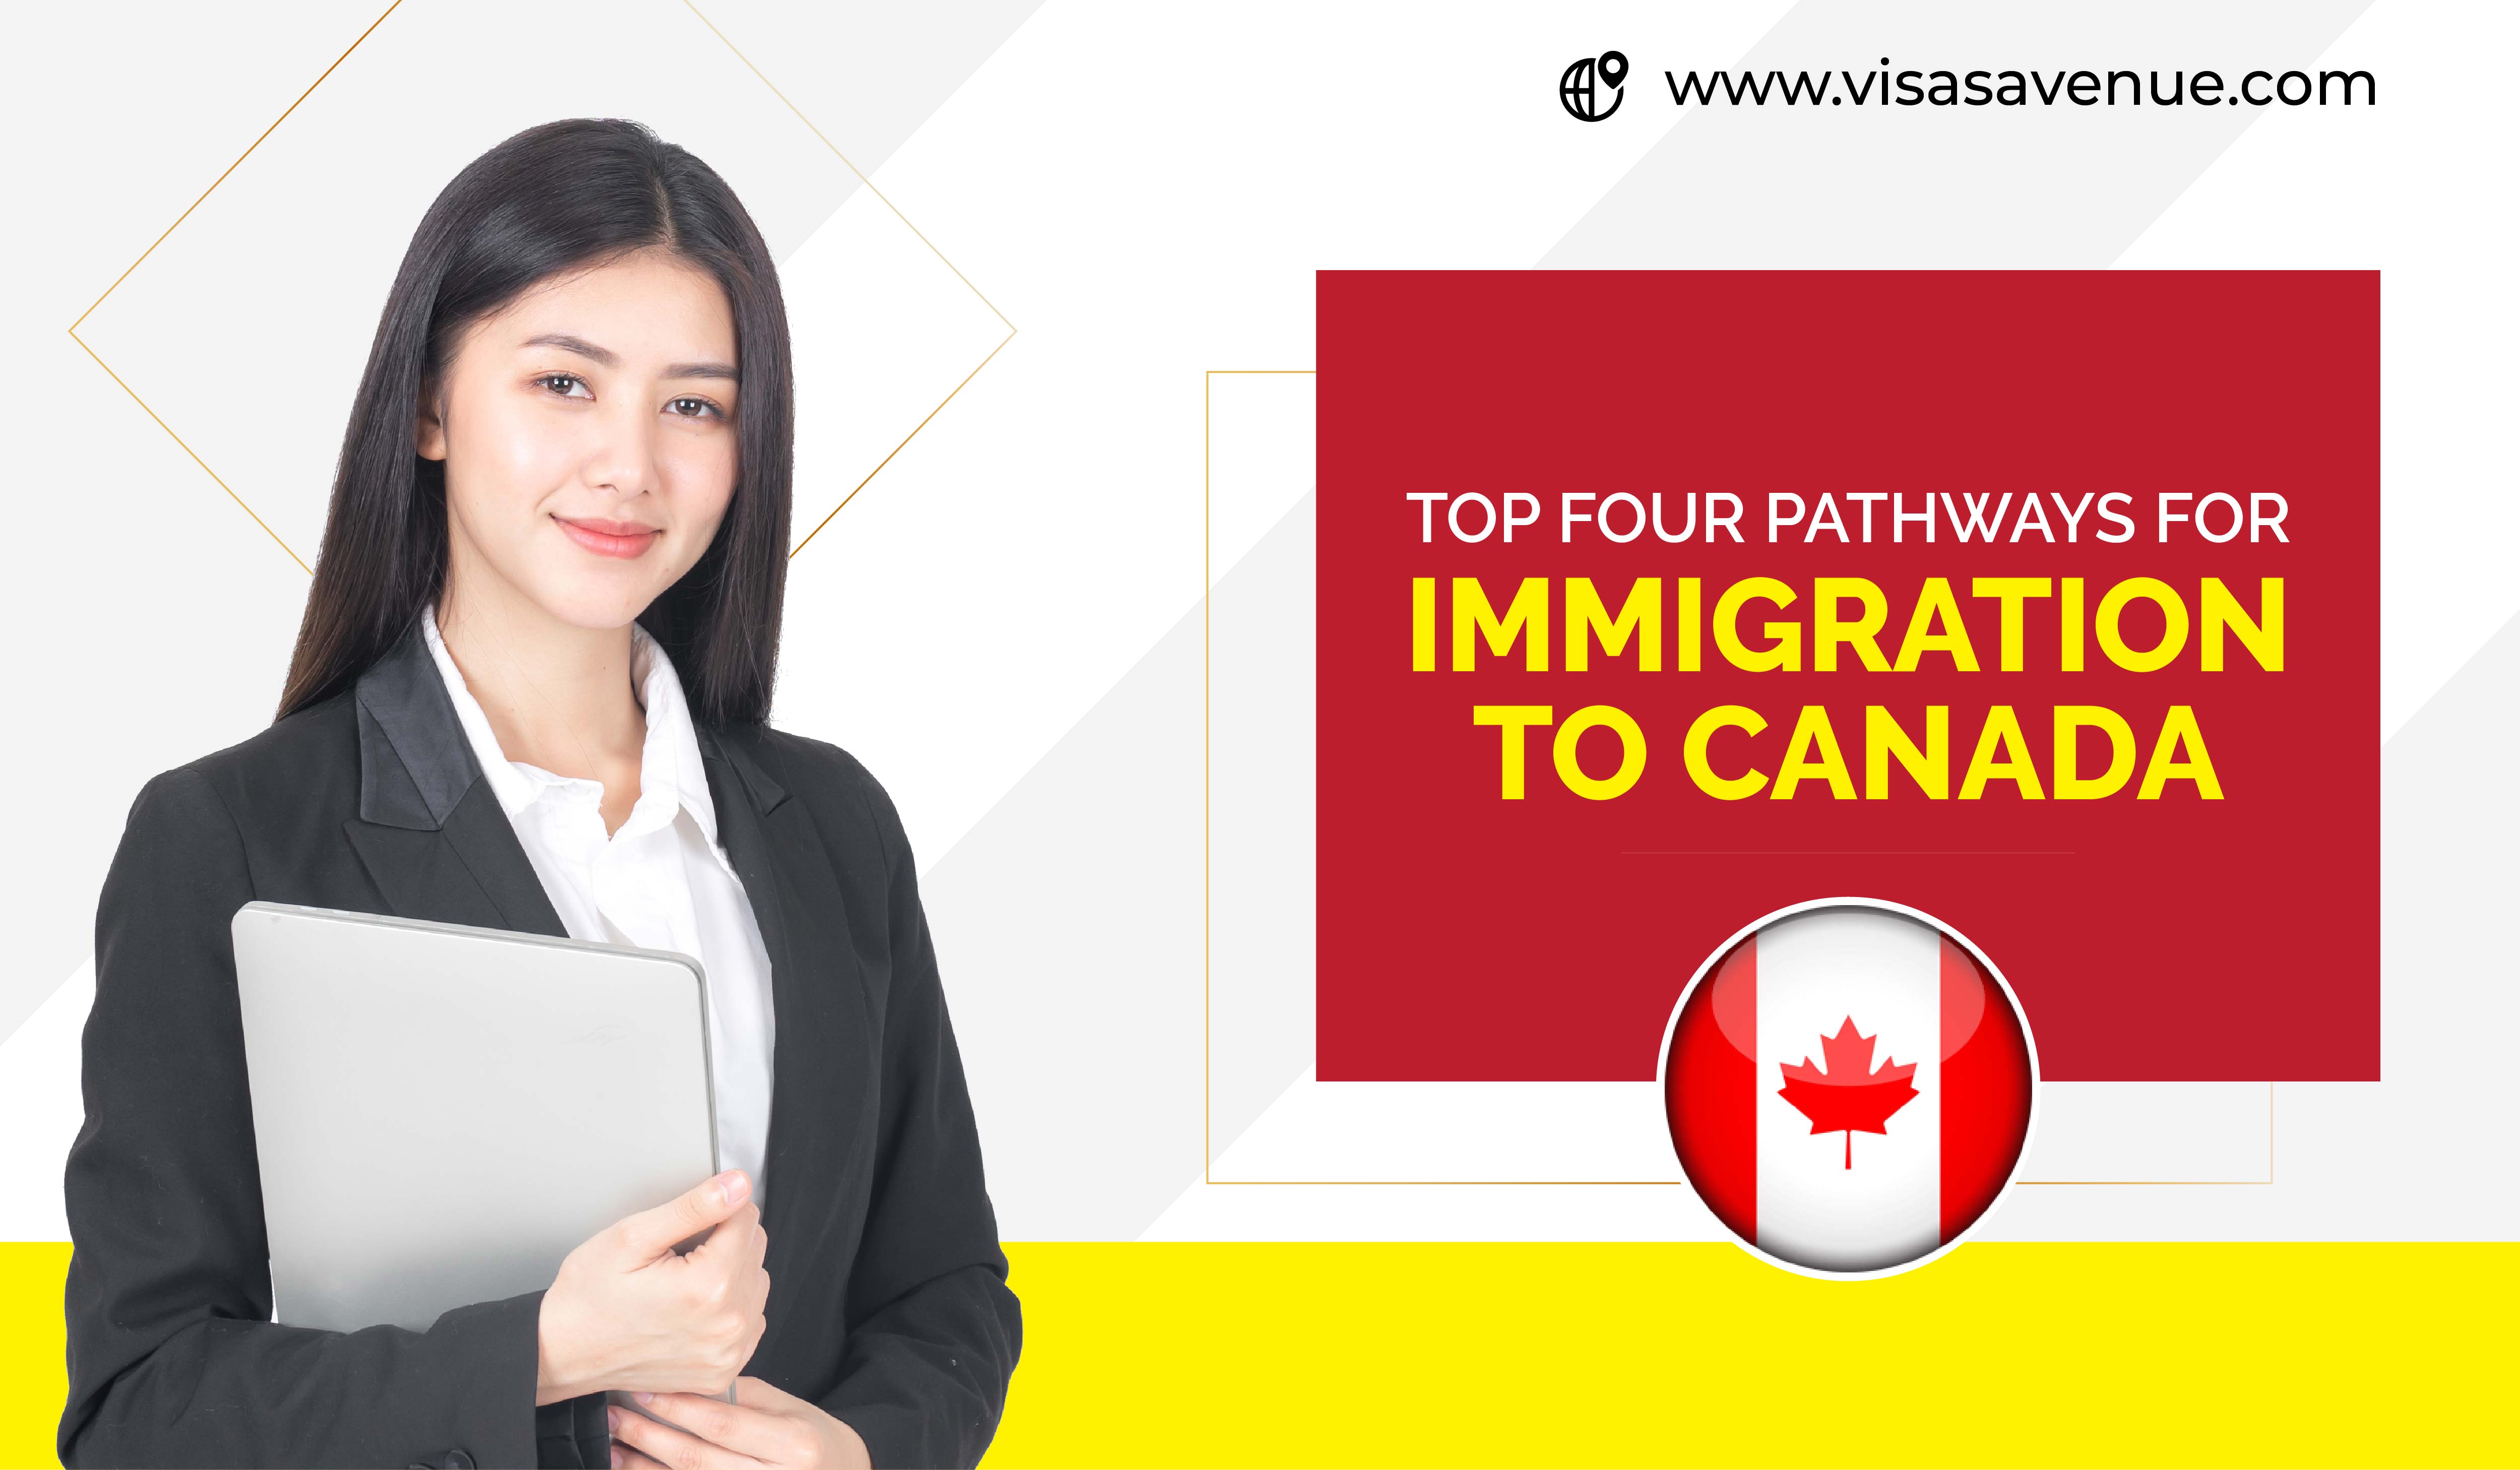 Top Four Pathways for Immigration to Canada